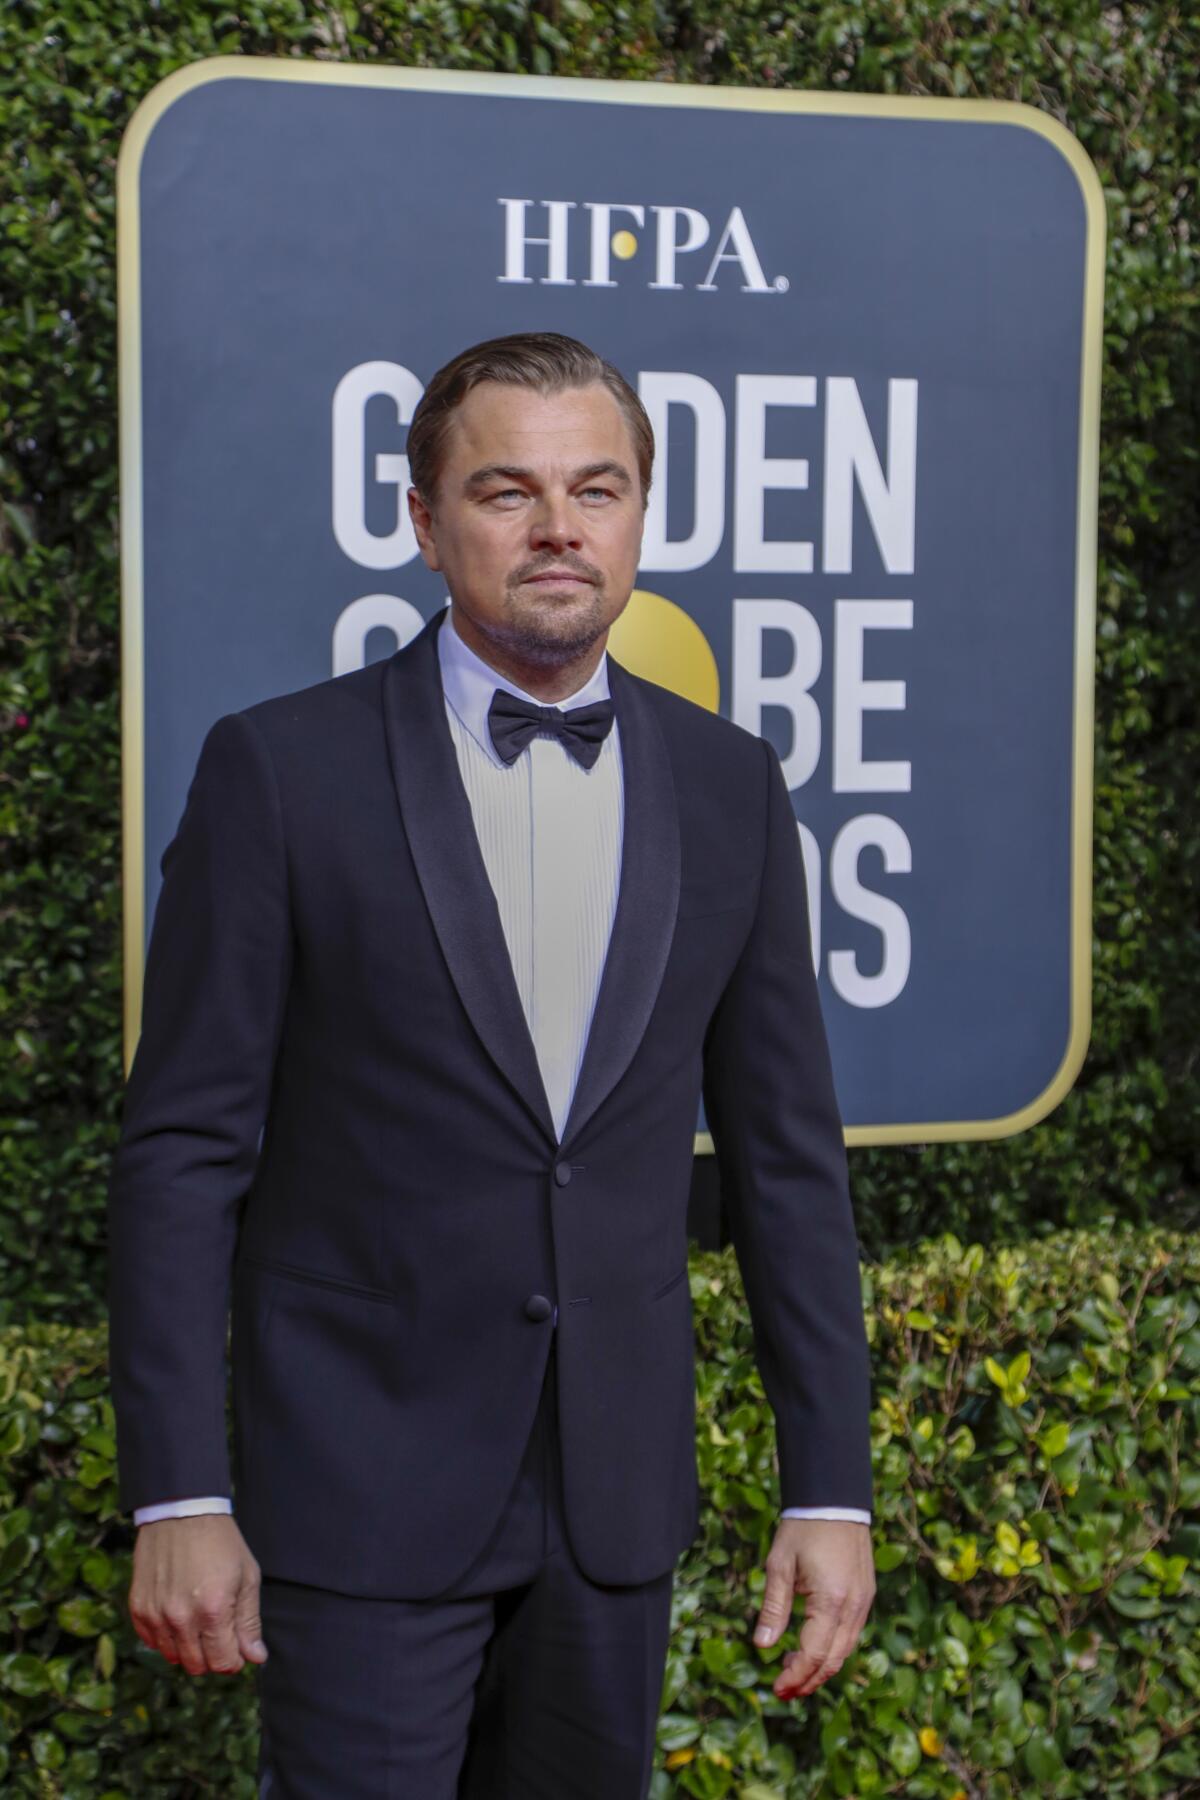 Leonardo DiCaprio is nominated in the lead actor category for his role in "Once Upon a Time ... in Hollywood."